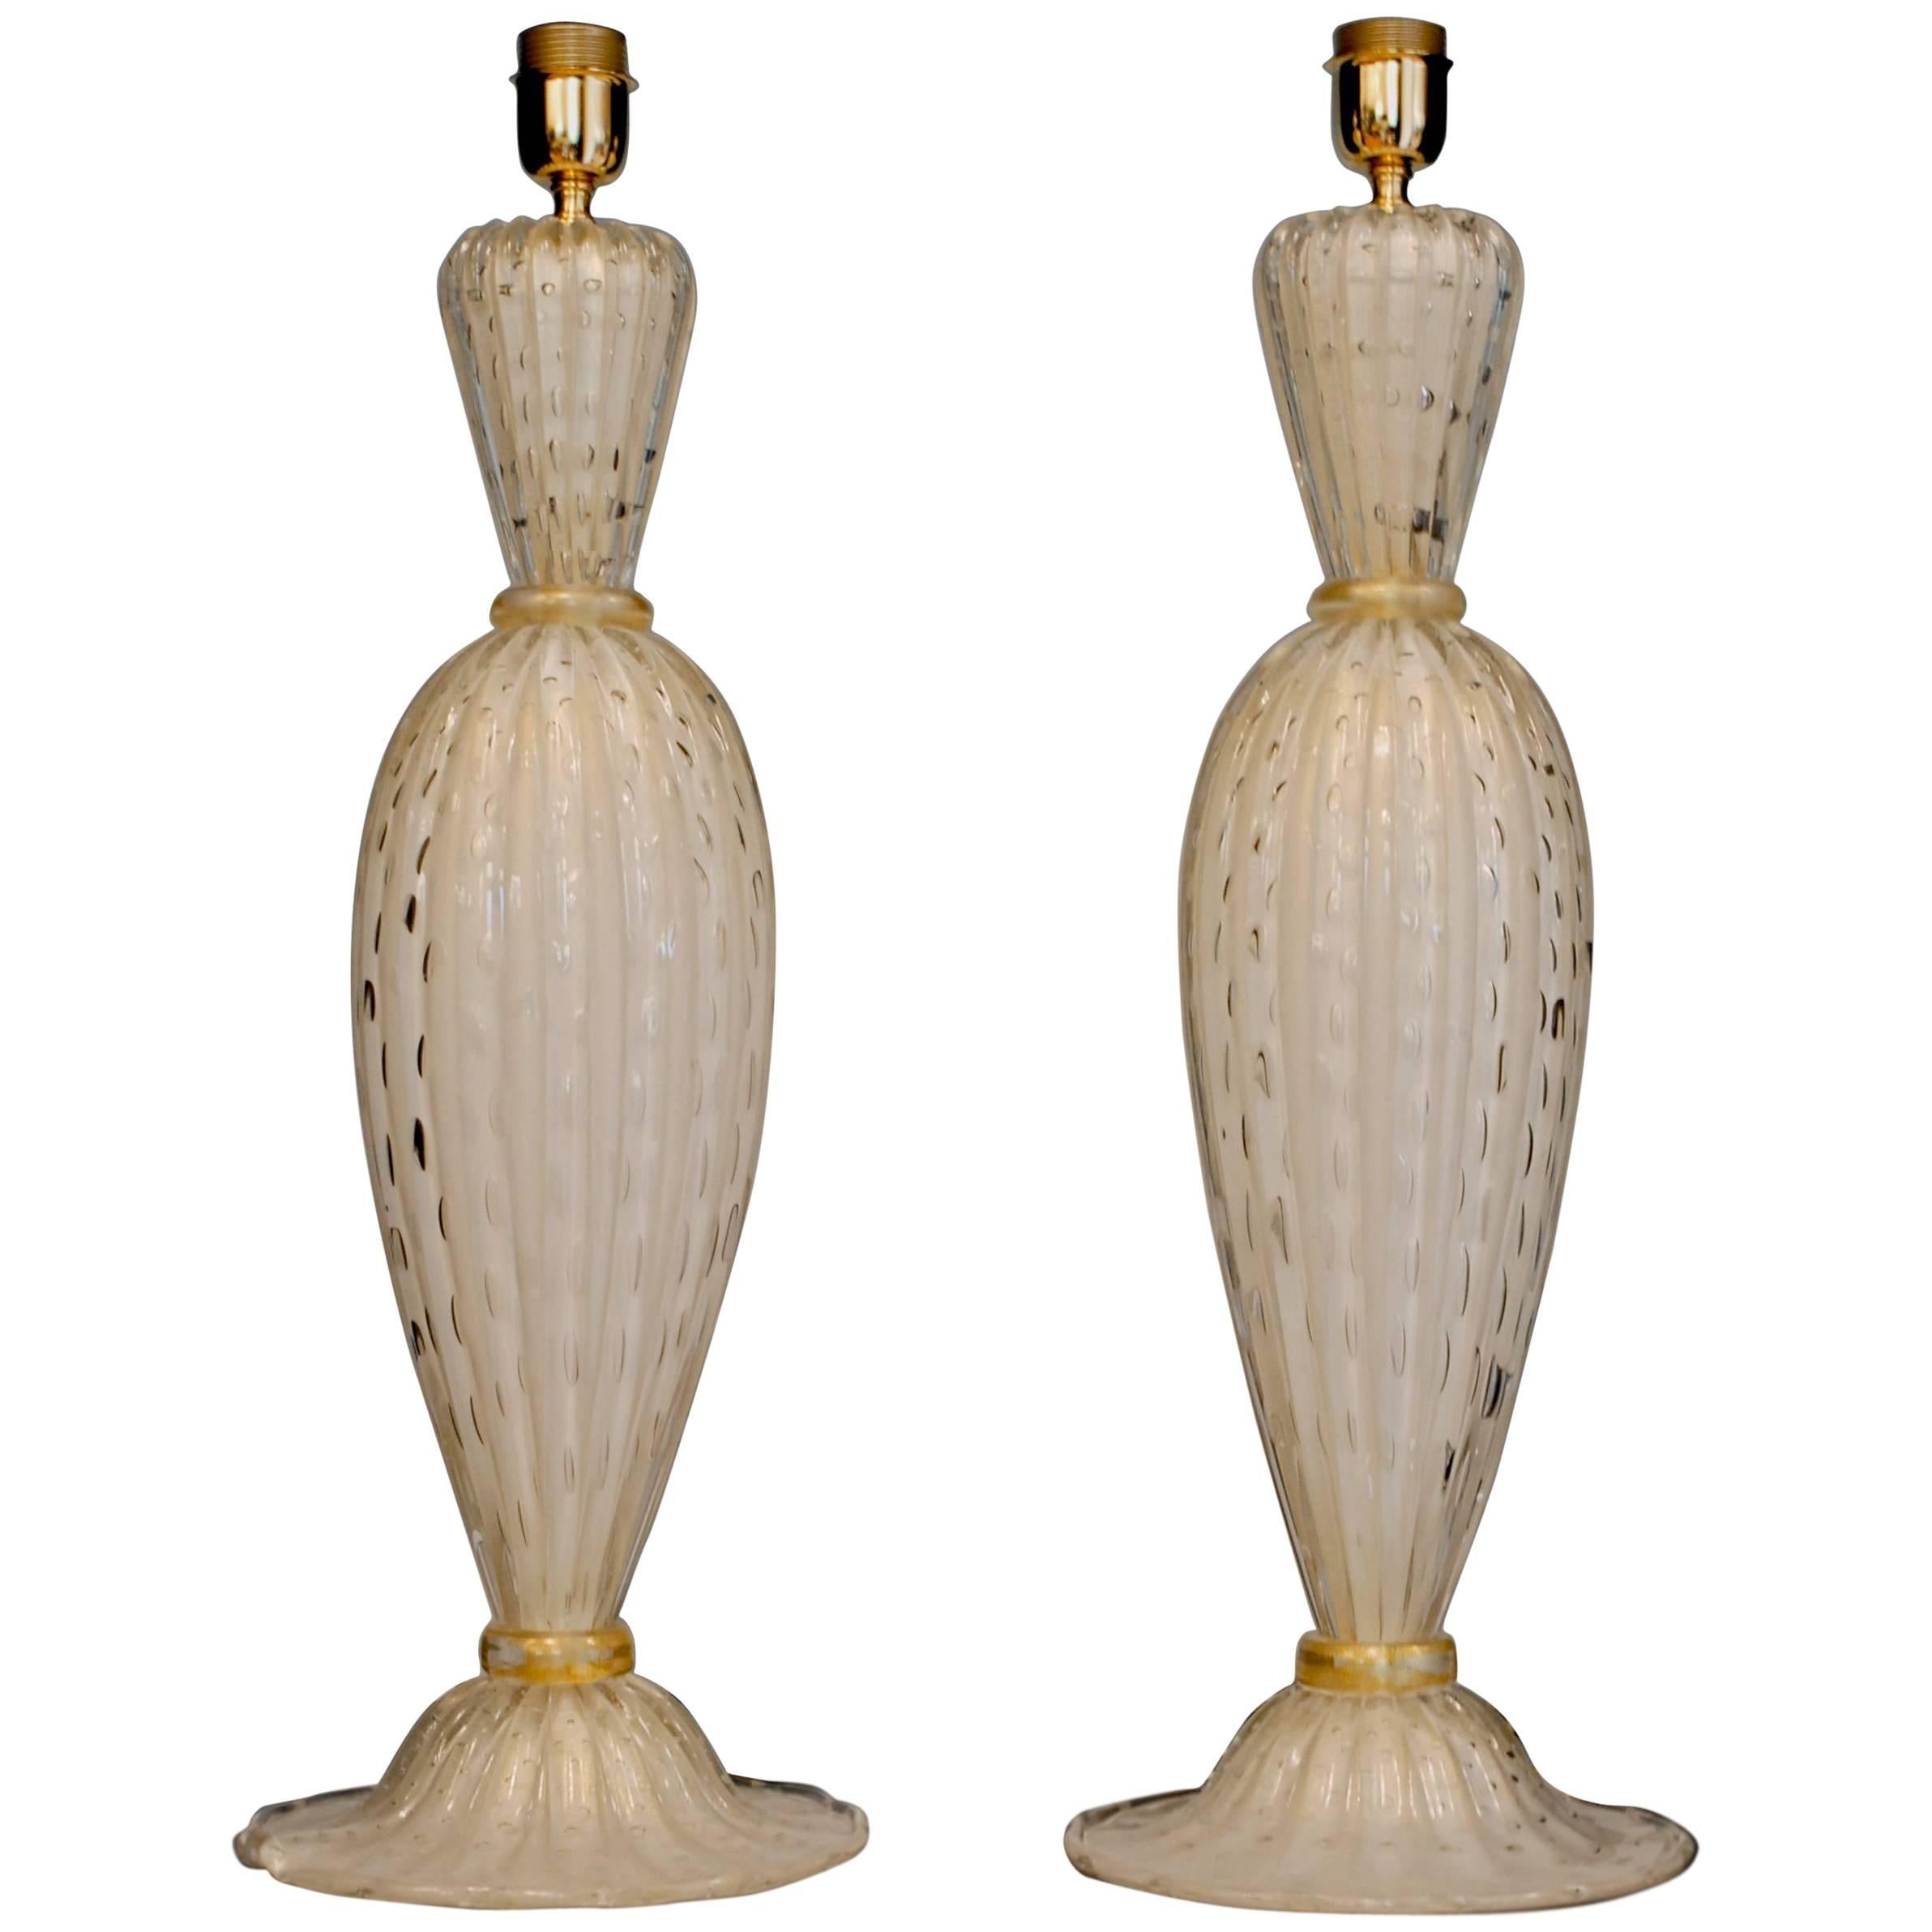 Alberto Dona Pair of White Ivory Table Lamps, Rigadin Balloton with Gold Leaf